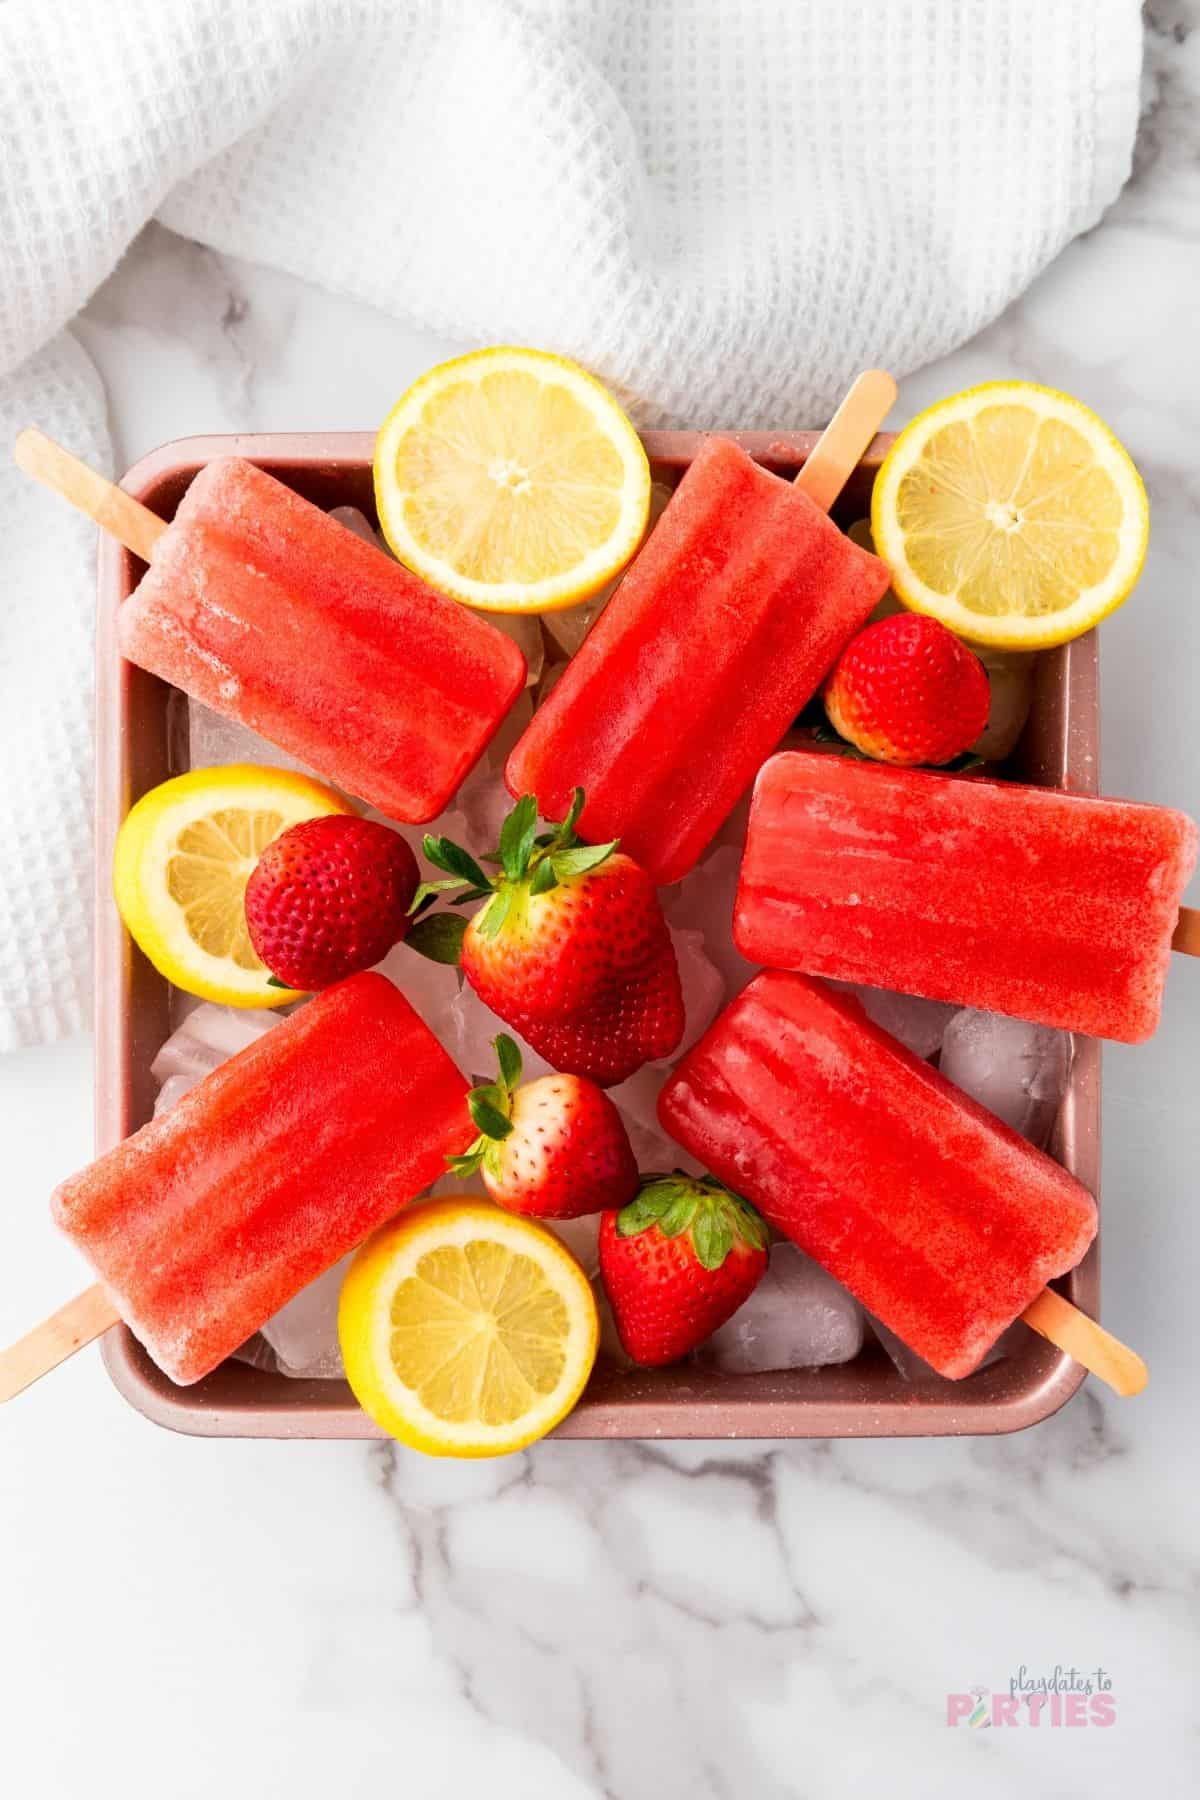 Homemade strawberry popsicles are nestled on a bowl of ice cubes with fresh strawberries and lemon slices.